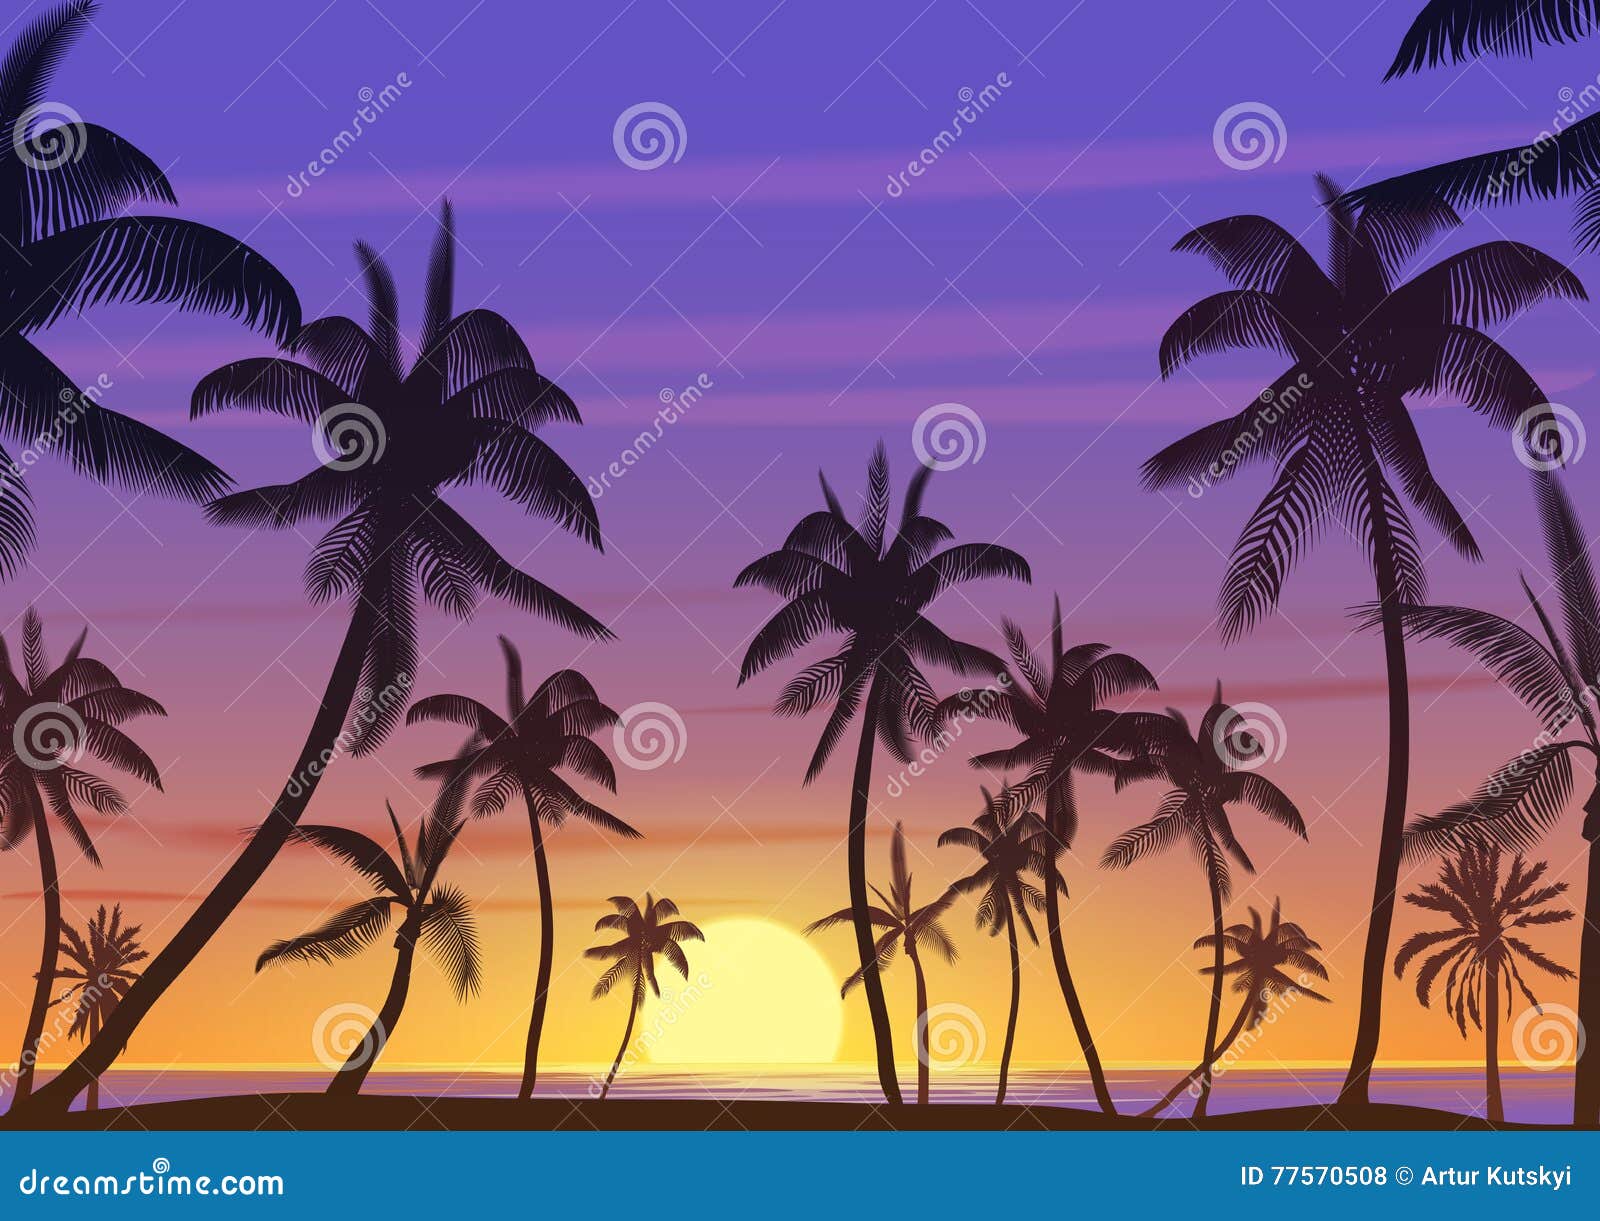 Palm Coconut Trees Silhouette at Sunset or Sunrise. Realistic Vector ...